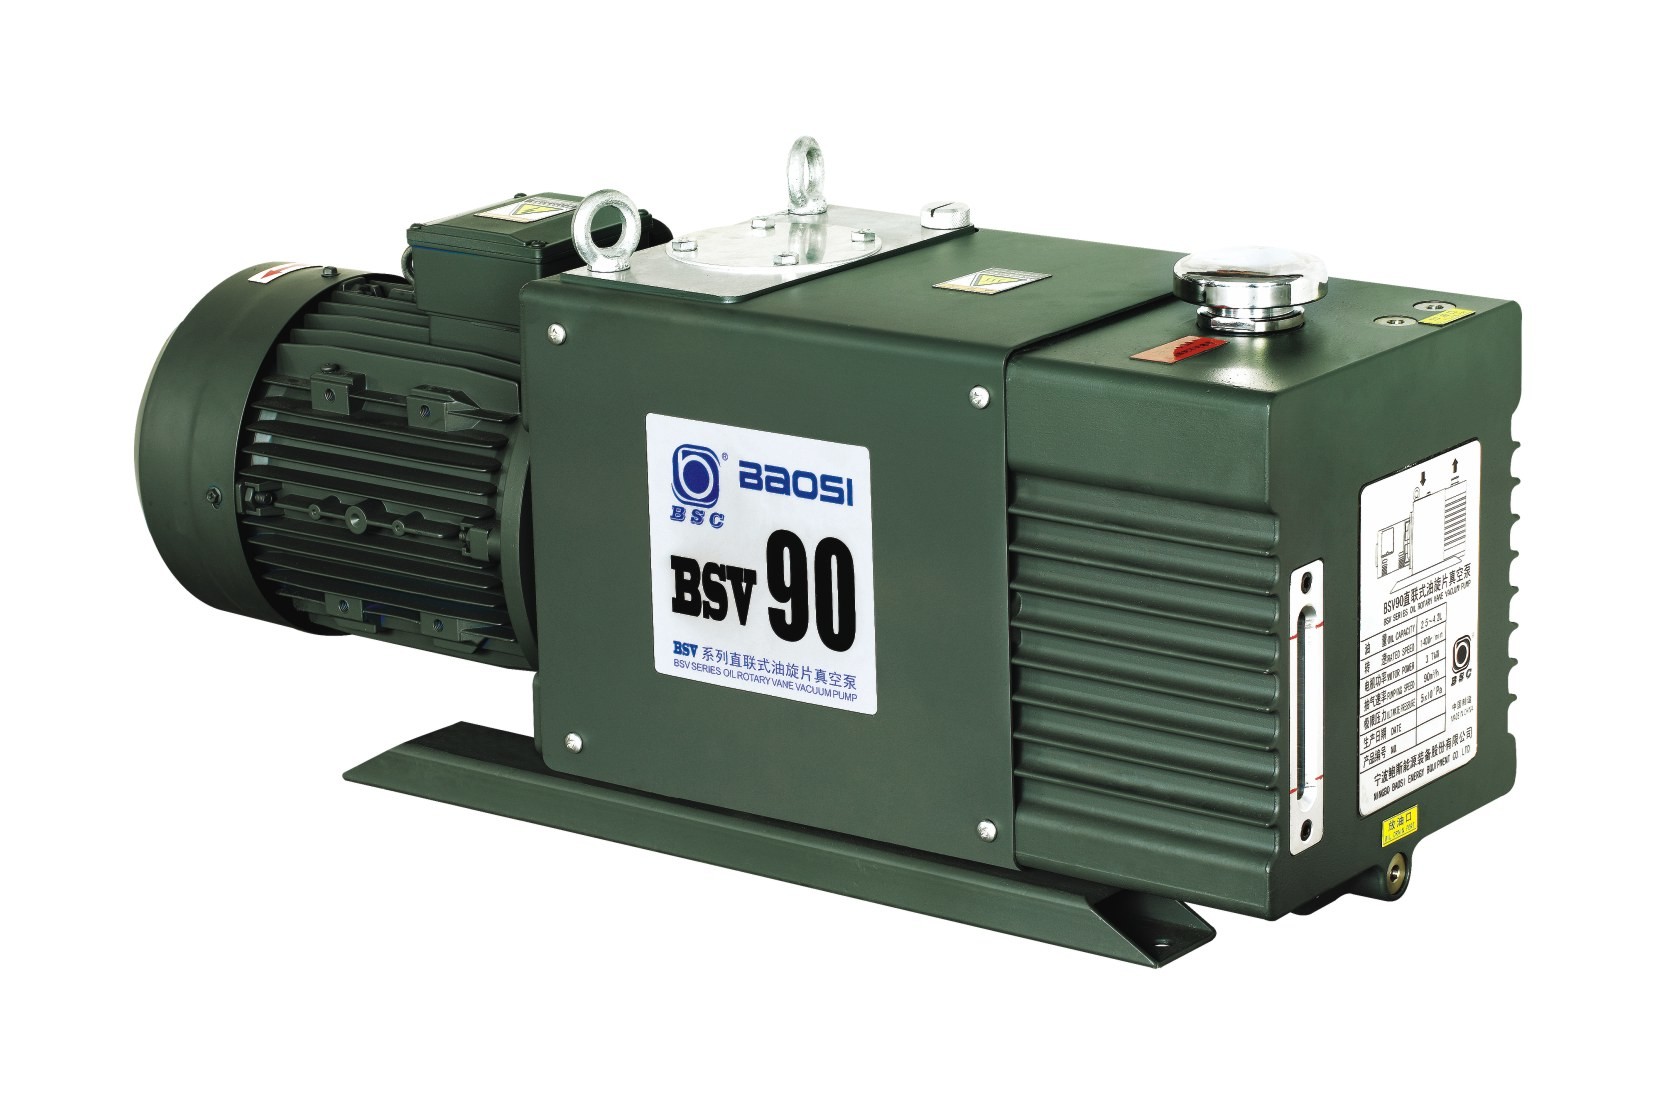 90 m3/h Double Stage Oil Sealed Rotary Vane Vacuum Pump BSV90 for SF6 Recovery System